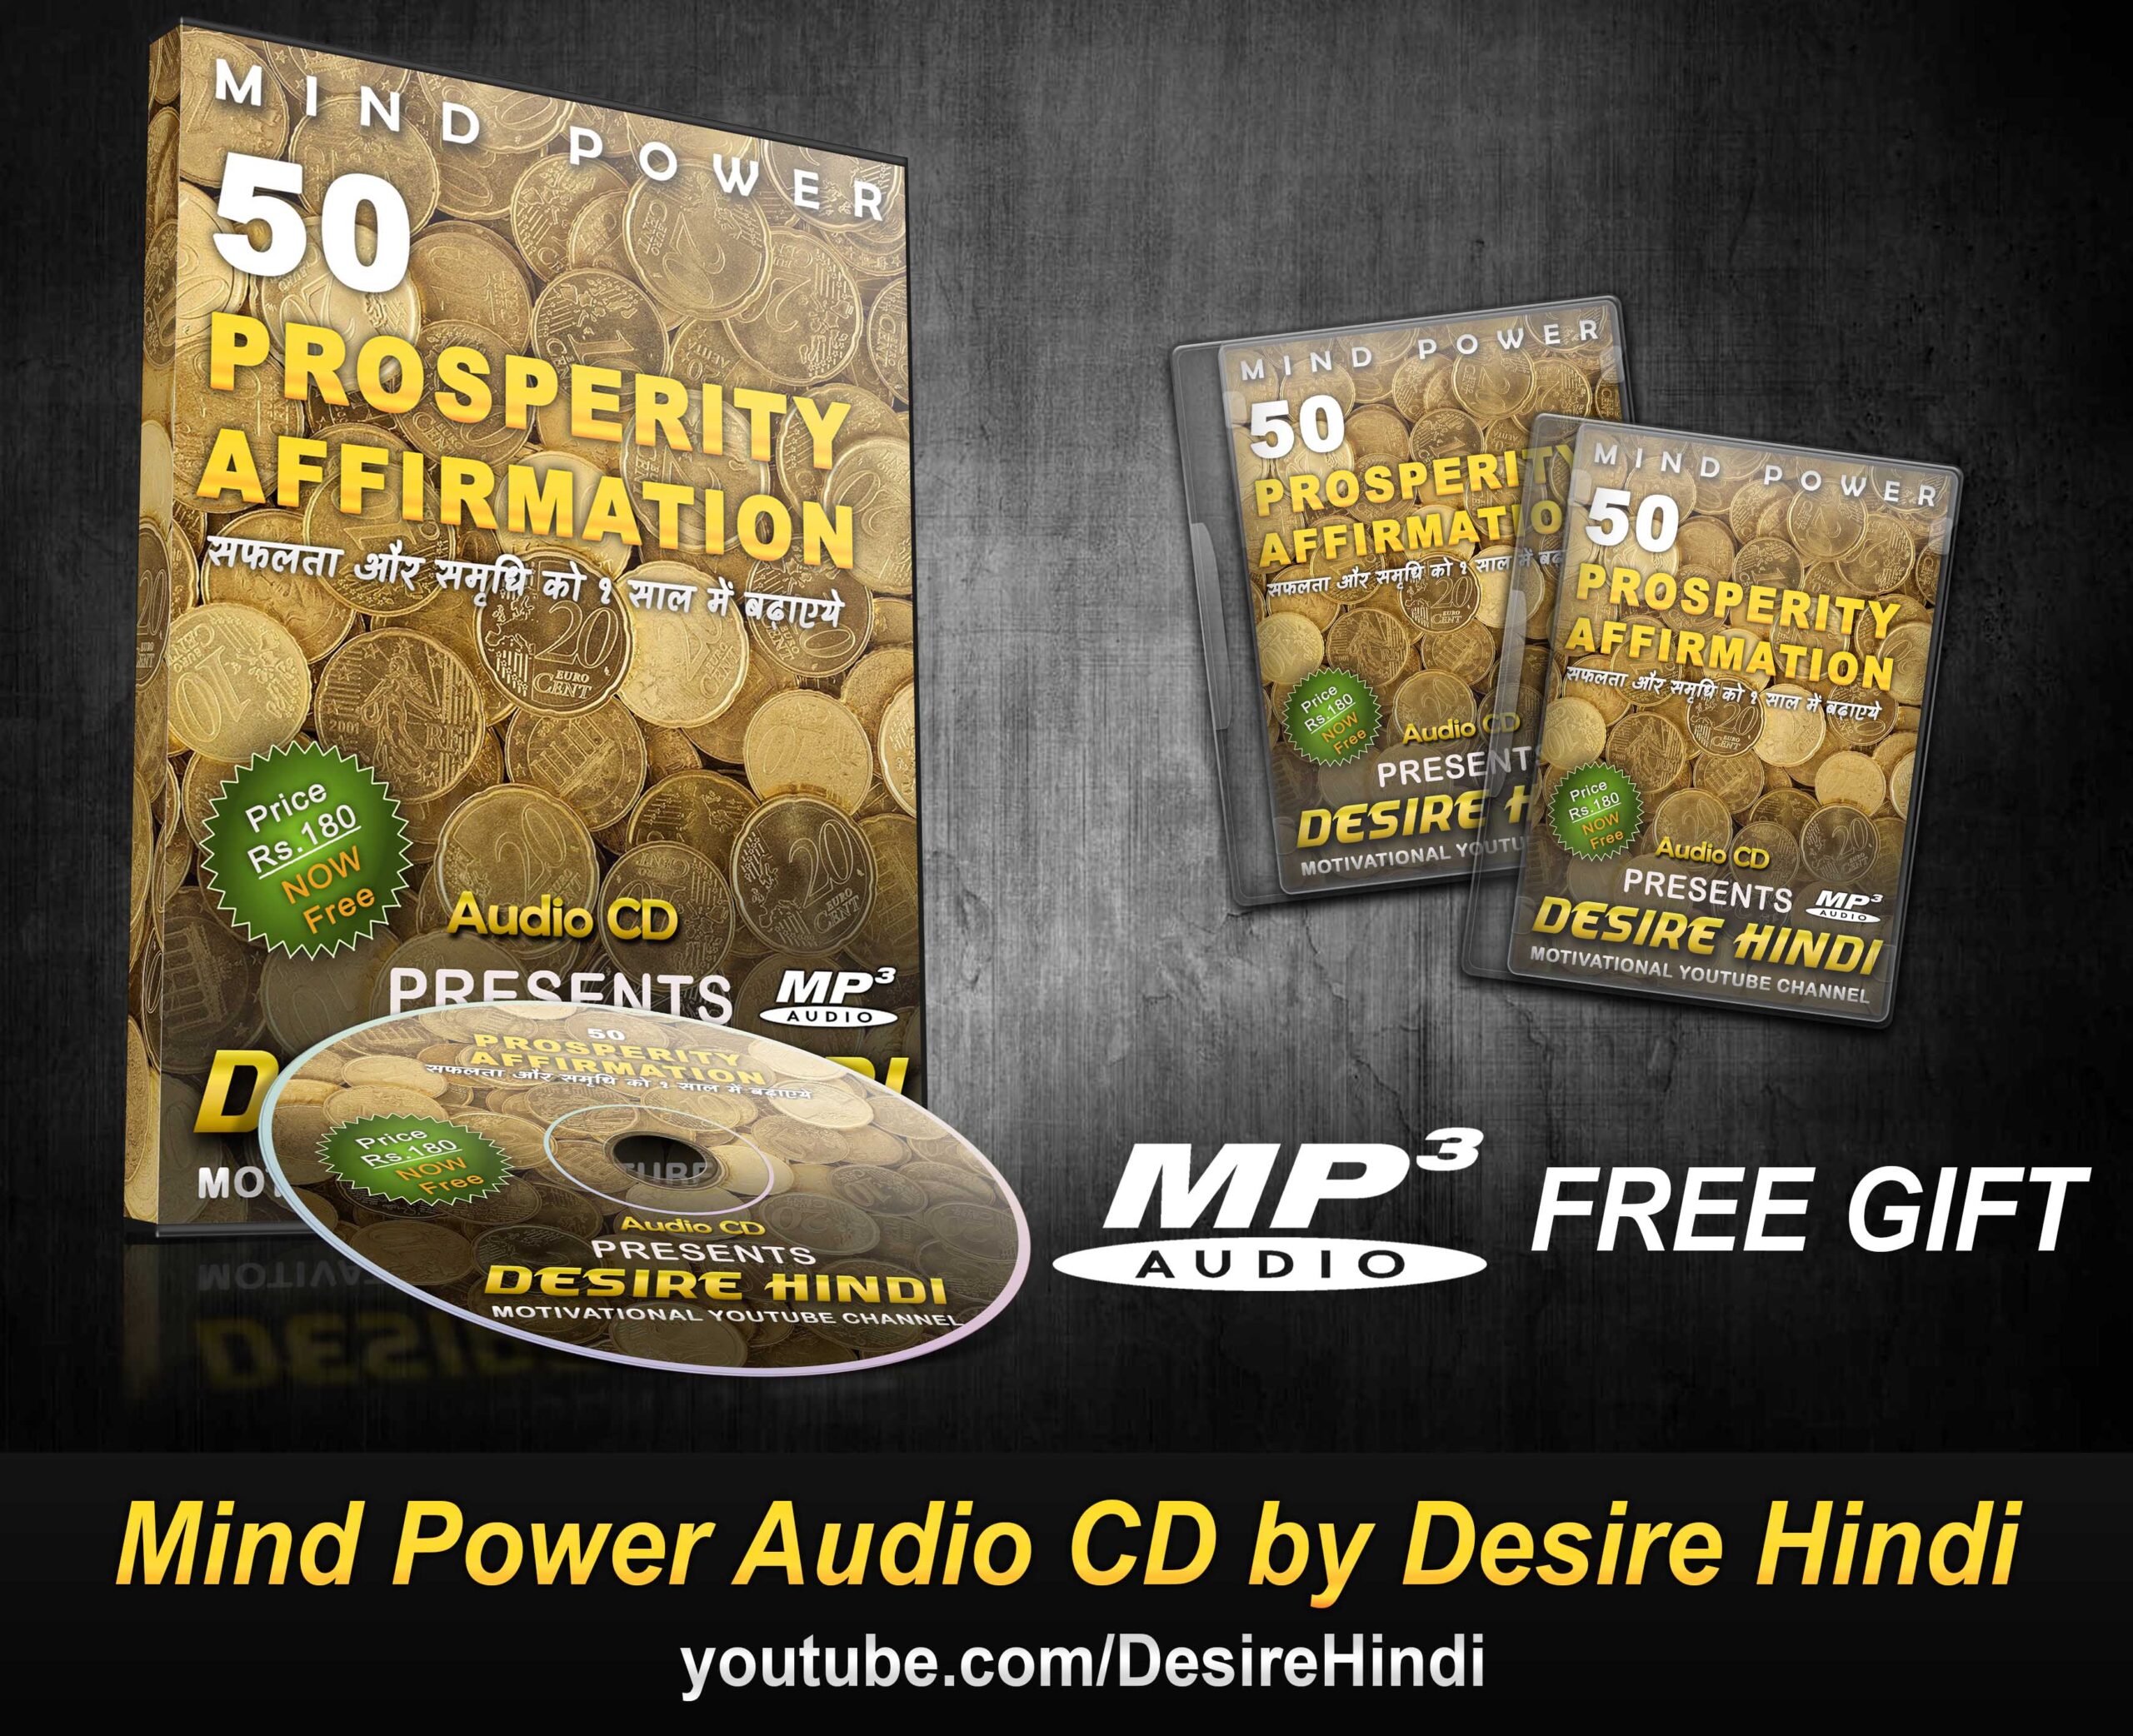 50-Powerful-Prosperity-Affirmation-in-Hindi-FREE-Audio-CD-Gift-By-Desire-Hindi-1